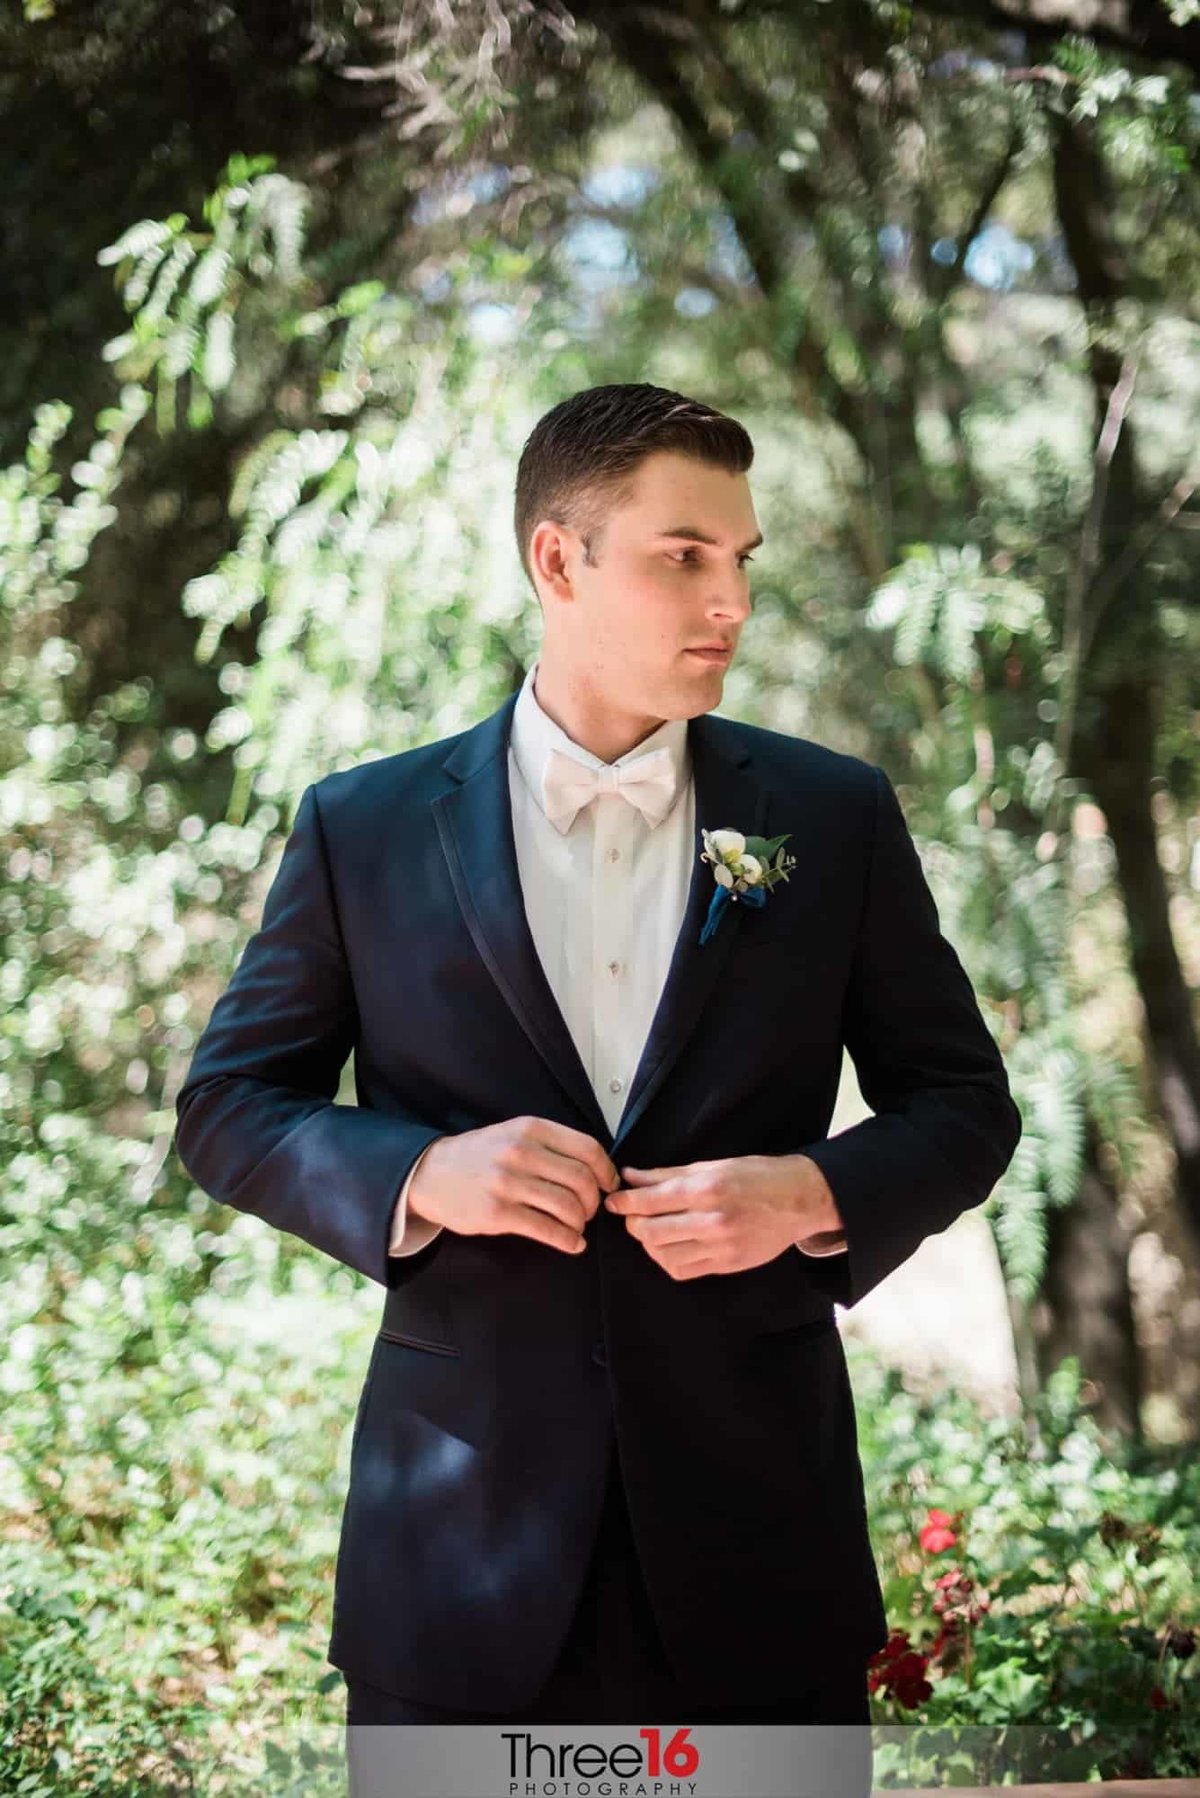 Groom buttons up his suit jacket just prior to the start of his wedding ceremony